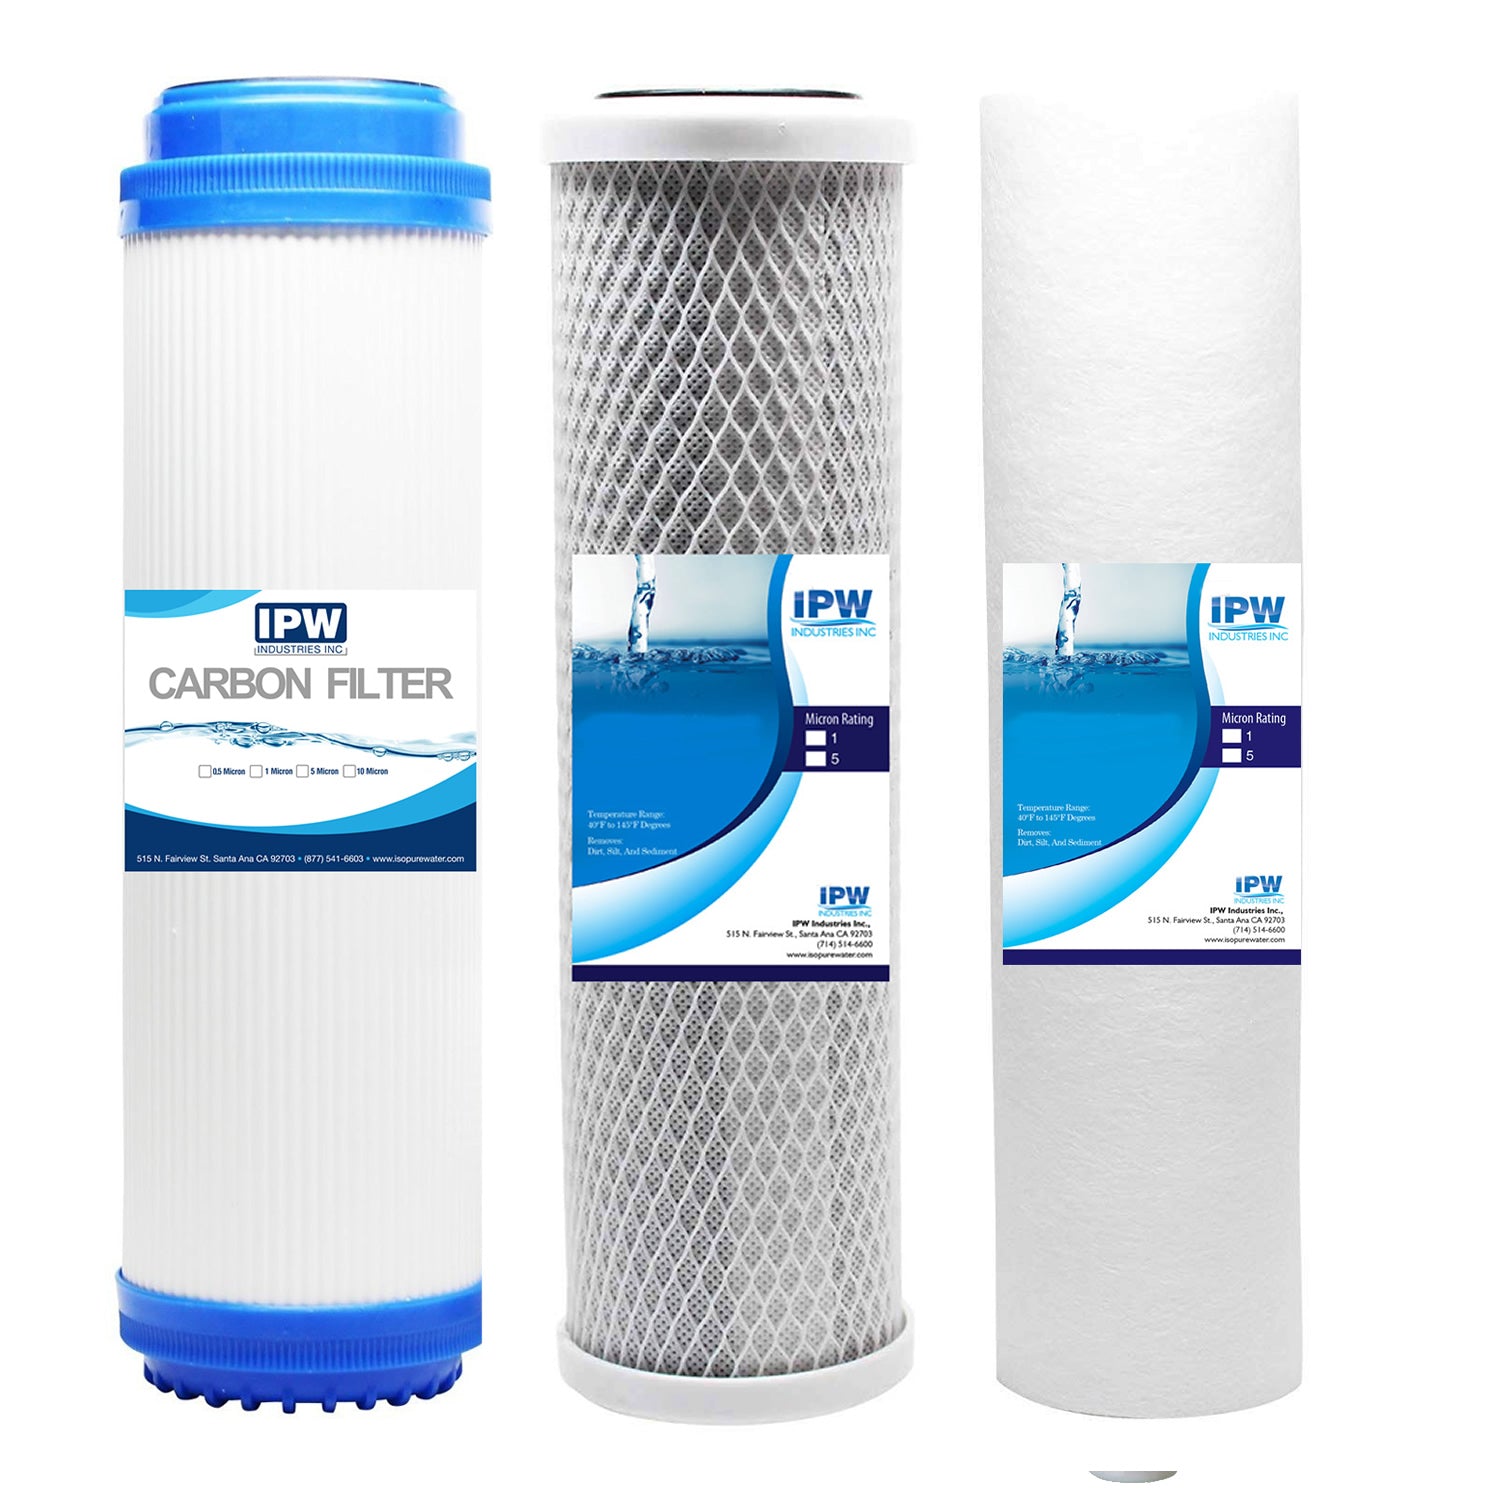 Fits Ispring F3 10-inch Universal Replacement Filter Set Cartridges For Reverse Osmosis And 3-stage Water Filtration Systems Sediment, Granular Activated Carbon, And Carbon Block Filters